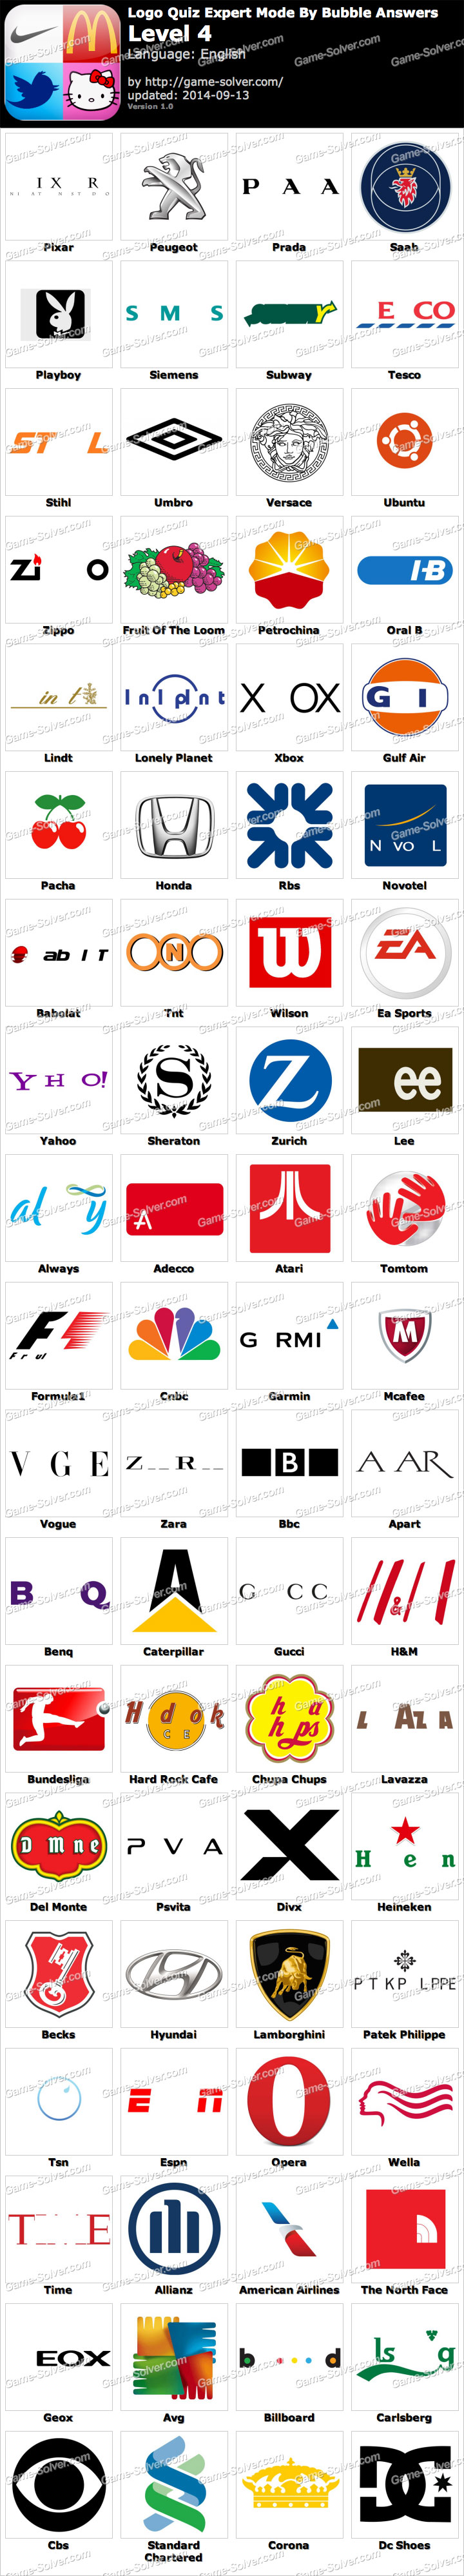 Ultimate Logo Quiz Answers 100%, Earn +4 Rbx